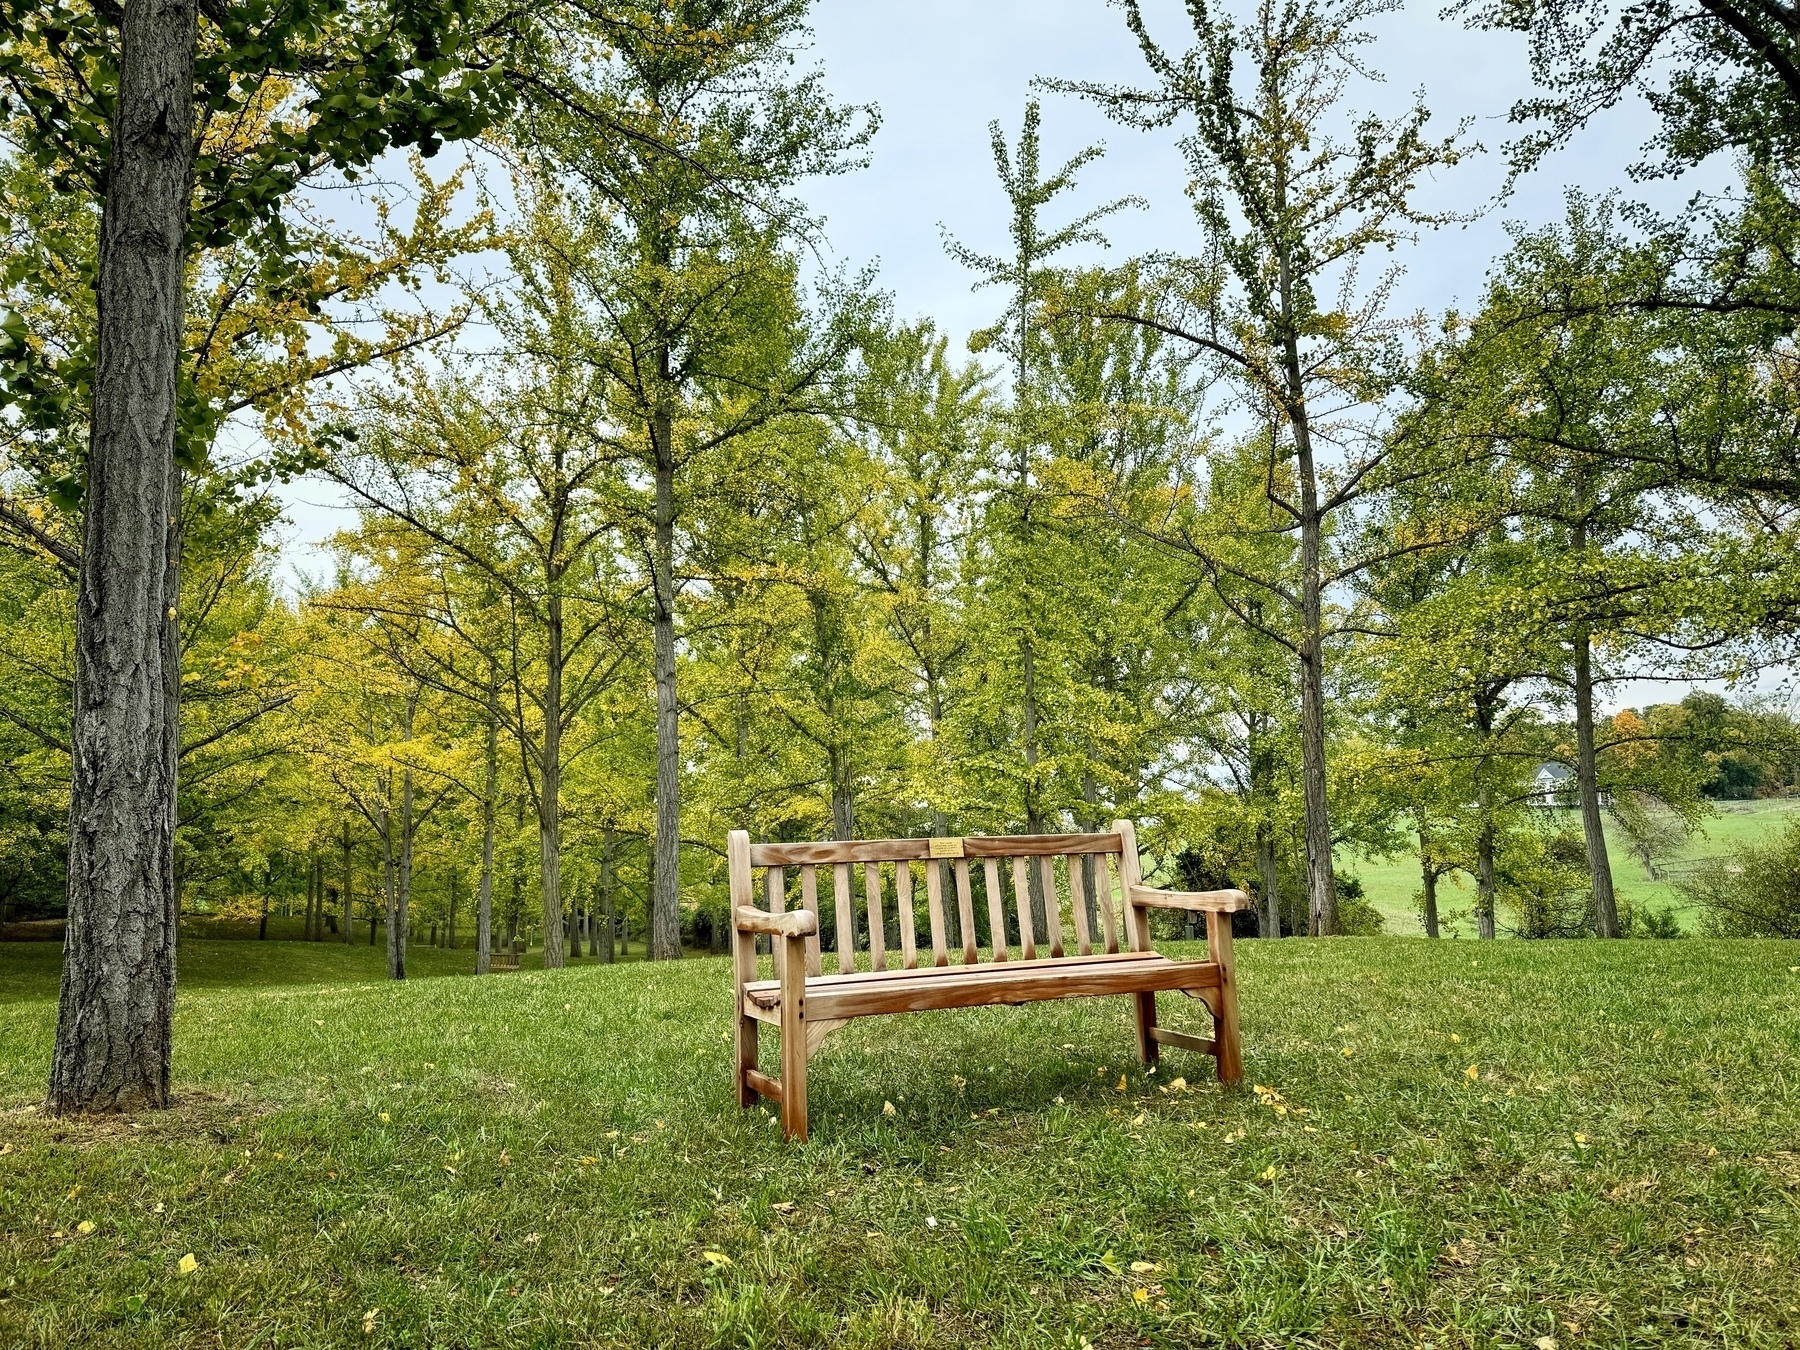 Bench in the grass among some trees